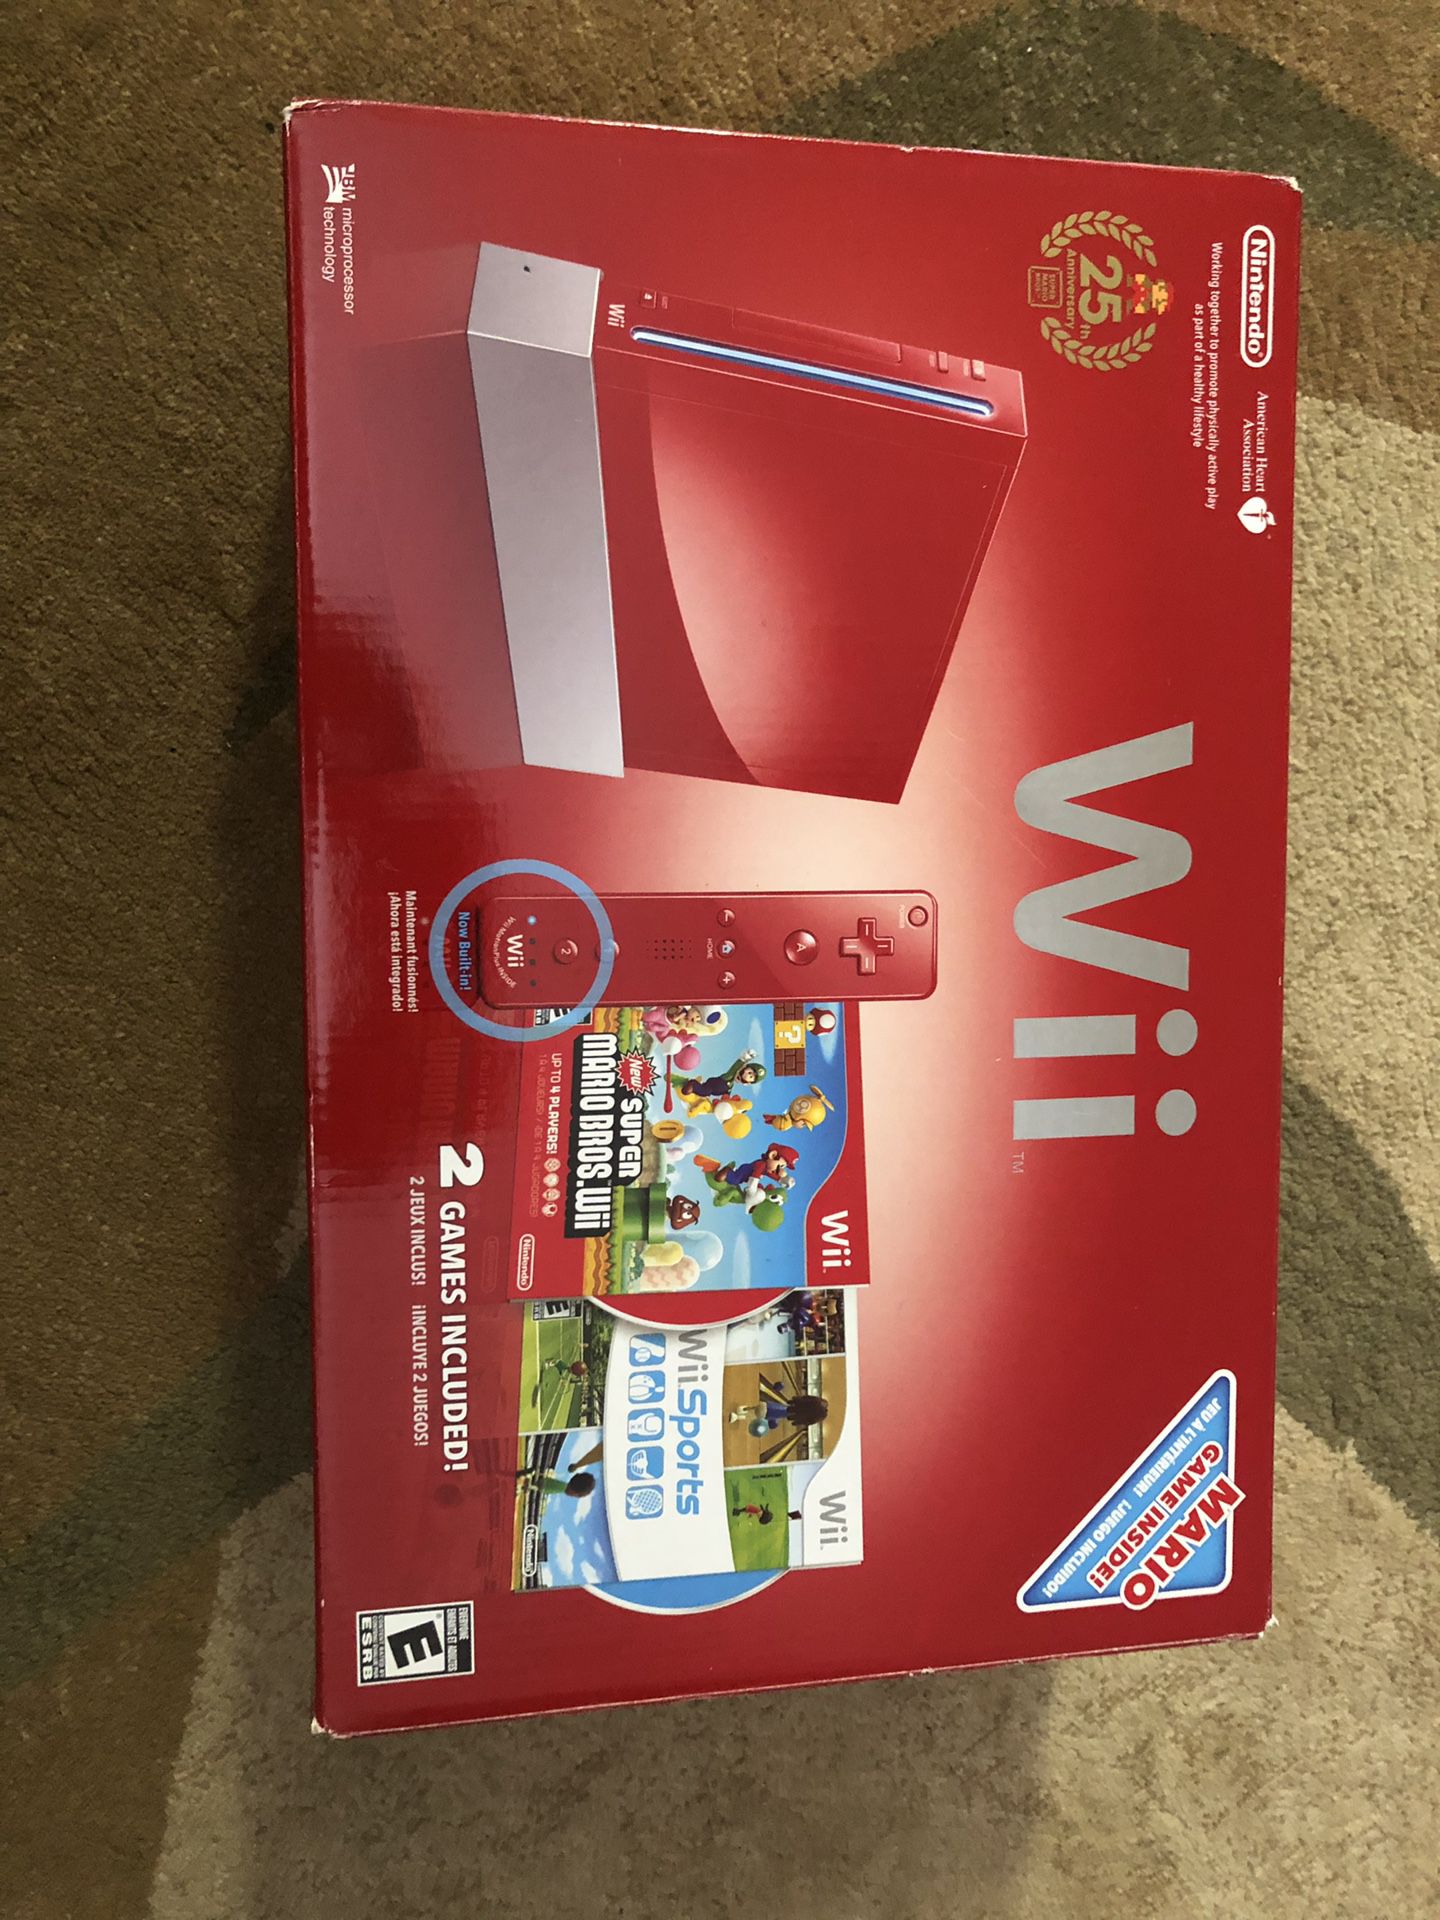 Wii with 2 games (Super Mario, Wii Sports), 2 controllers